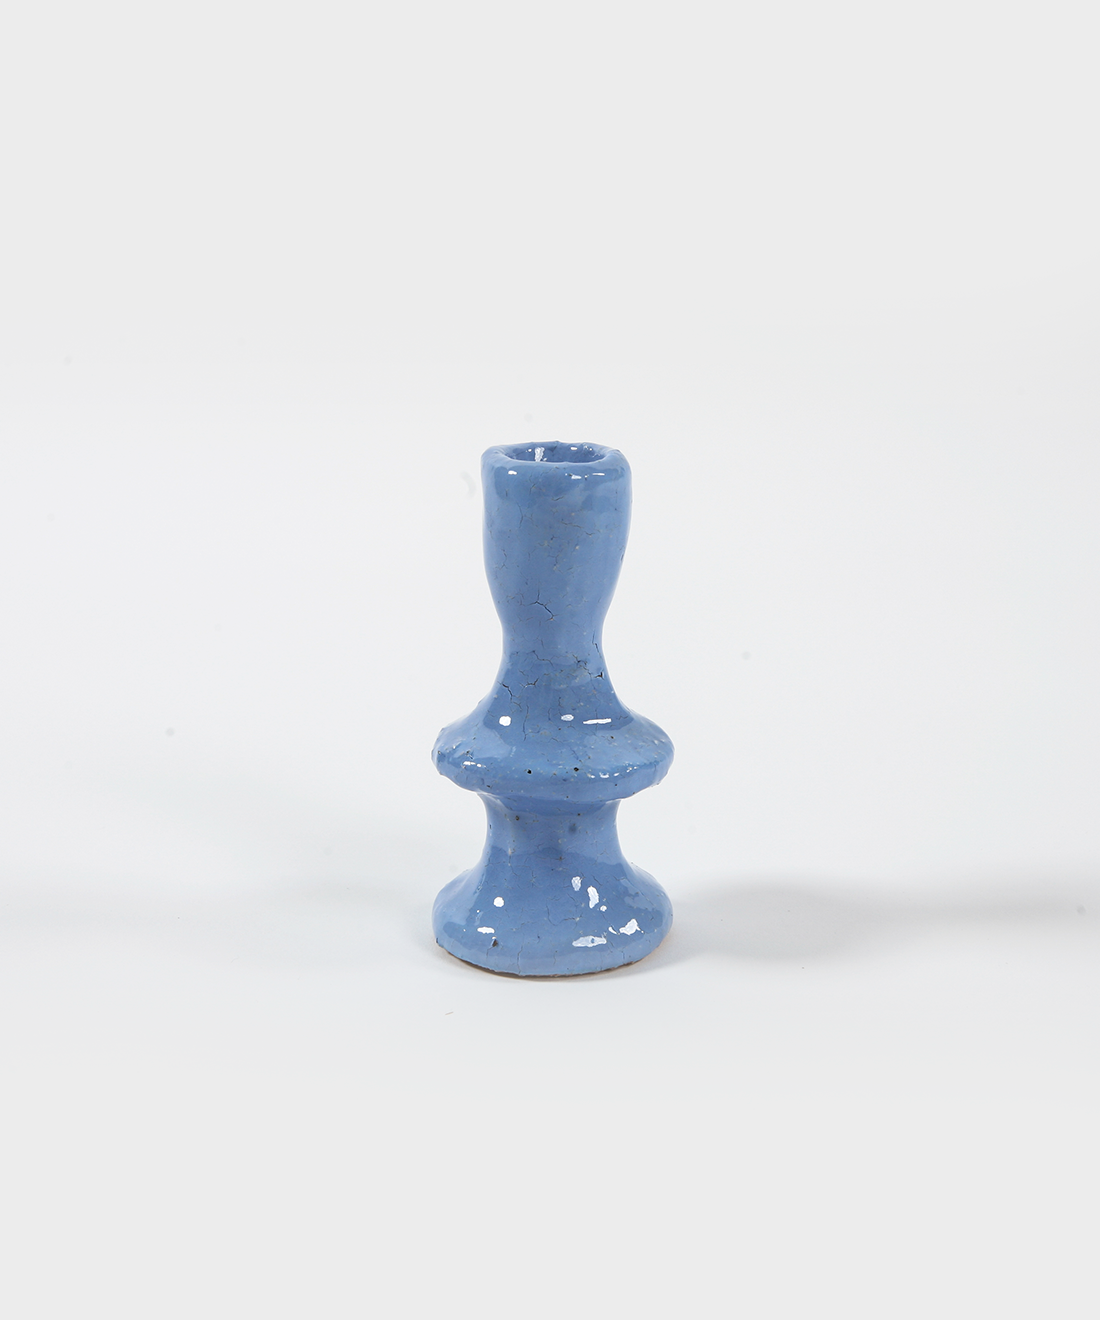 Wonky Candlesticks in Baby Blue